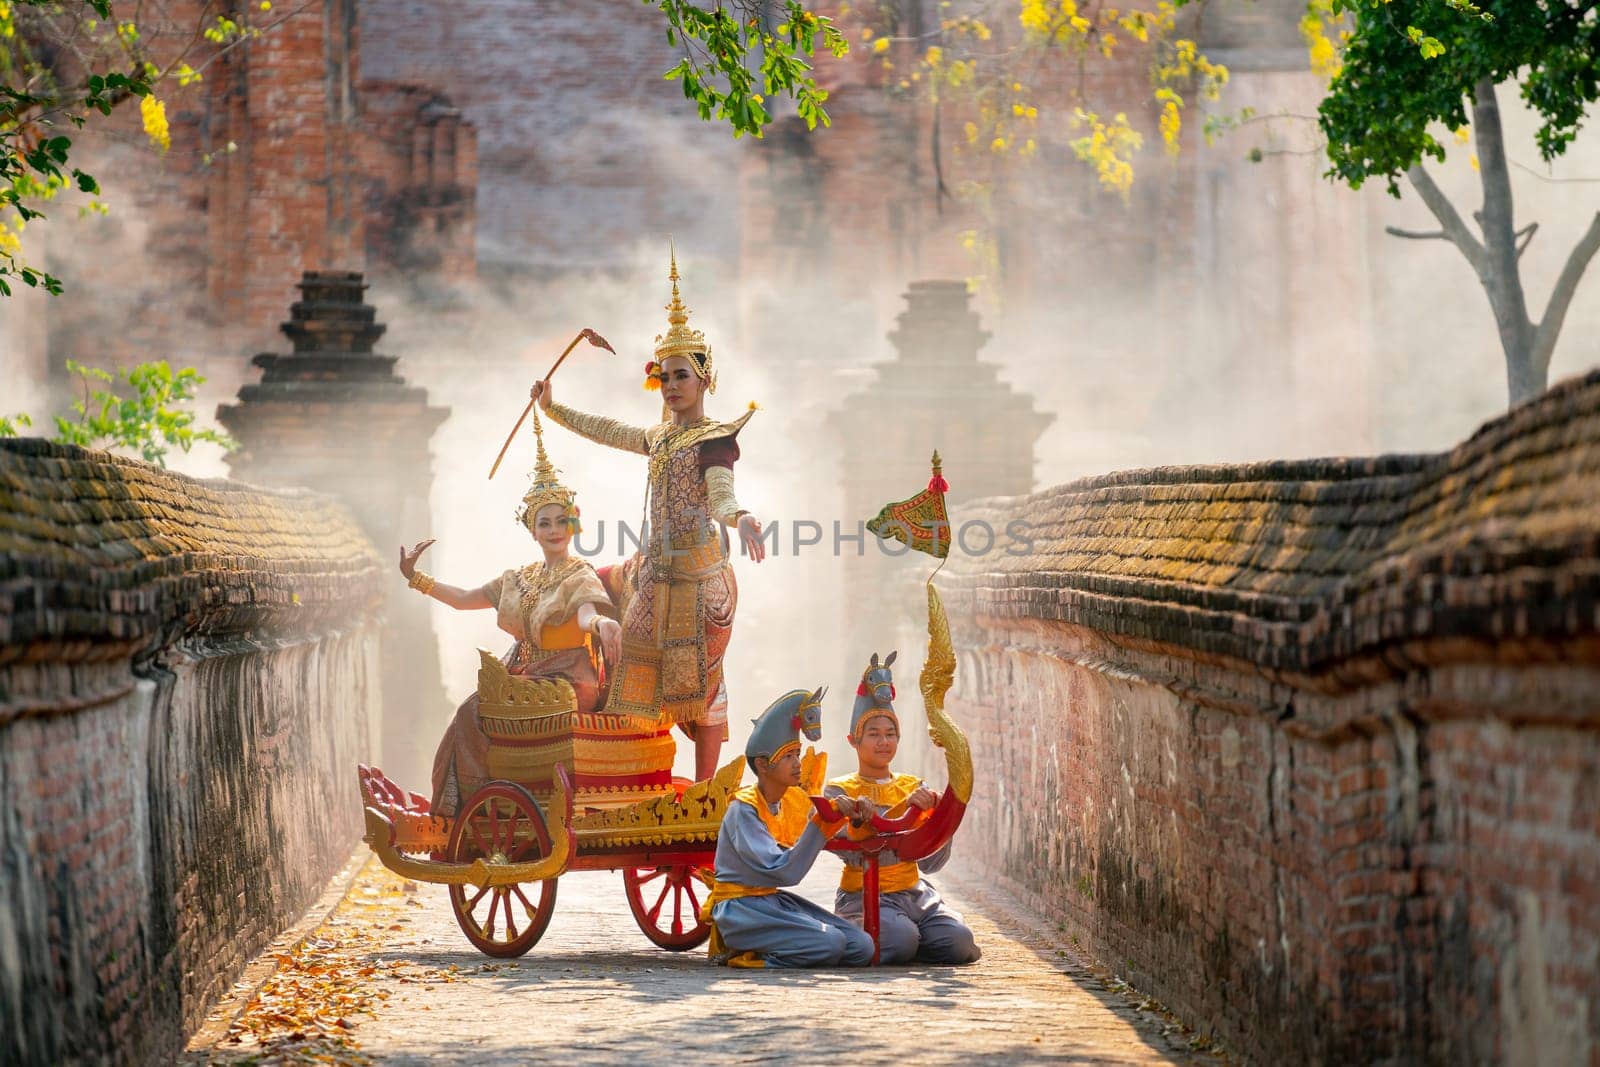 Asian man and woman with Thai old traditional dress stay together on traditional chariot in front of ancient building with mist of fog.